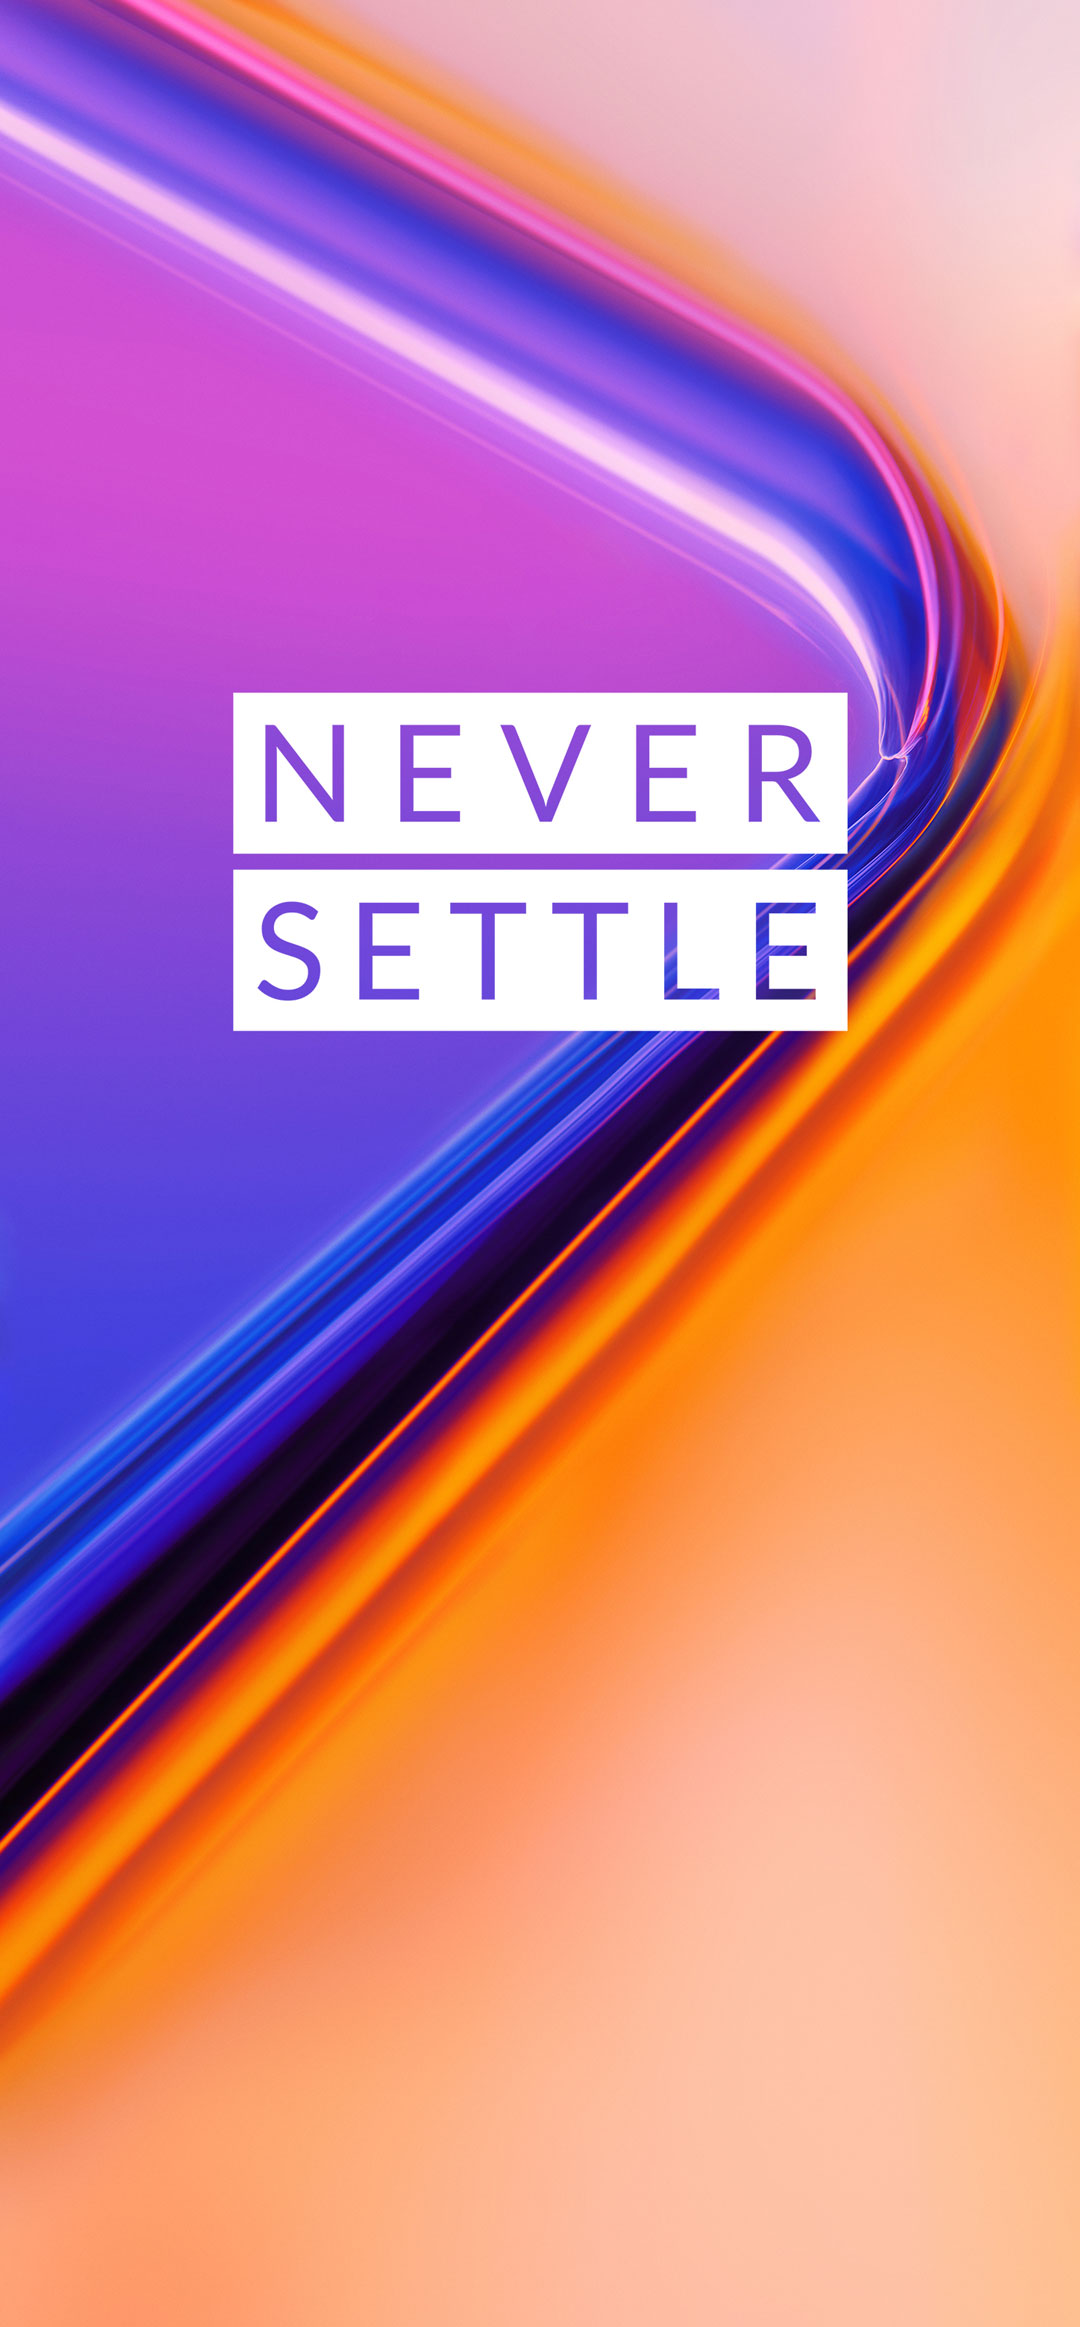 Never Settle Wallpaper Of Oneplus 7 Pro - Graphic Design , HD Wallpaper & Backgrounds